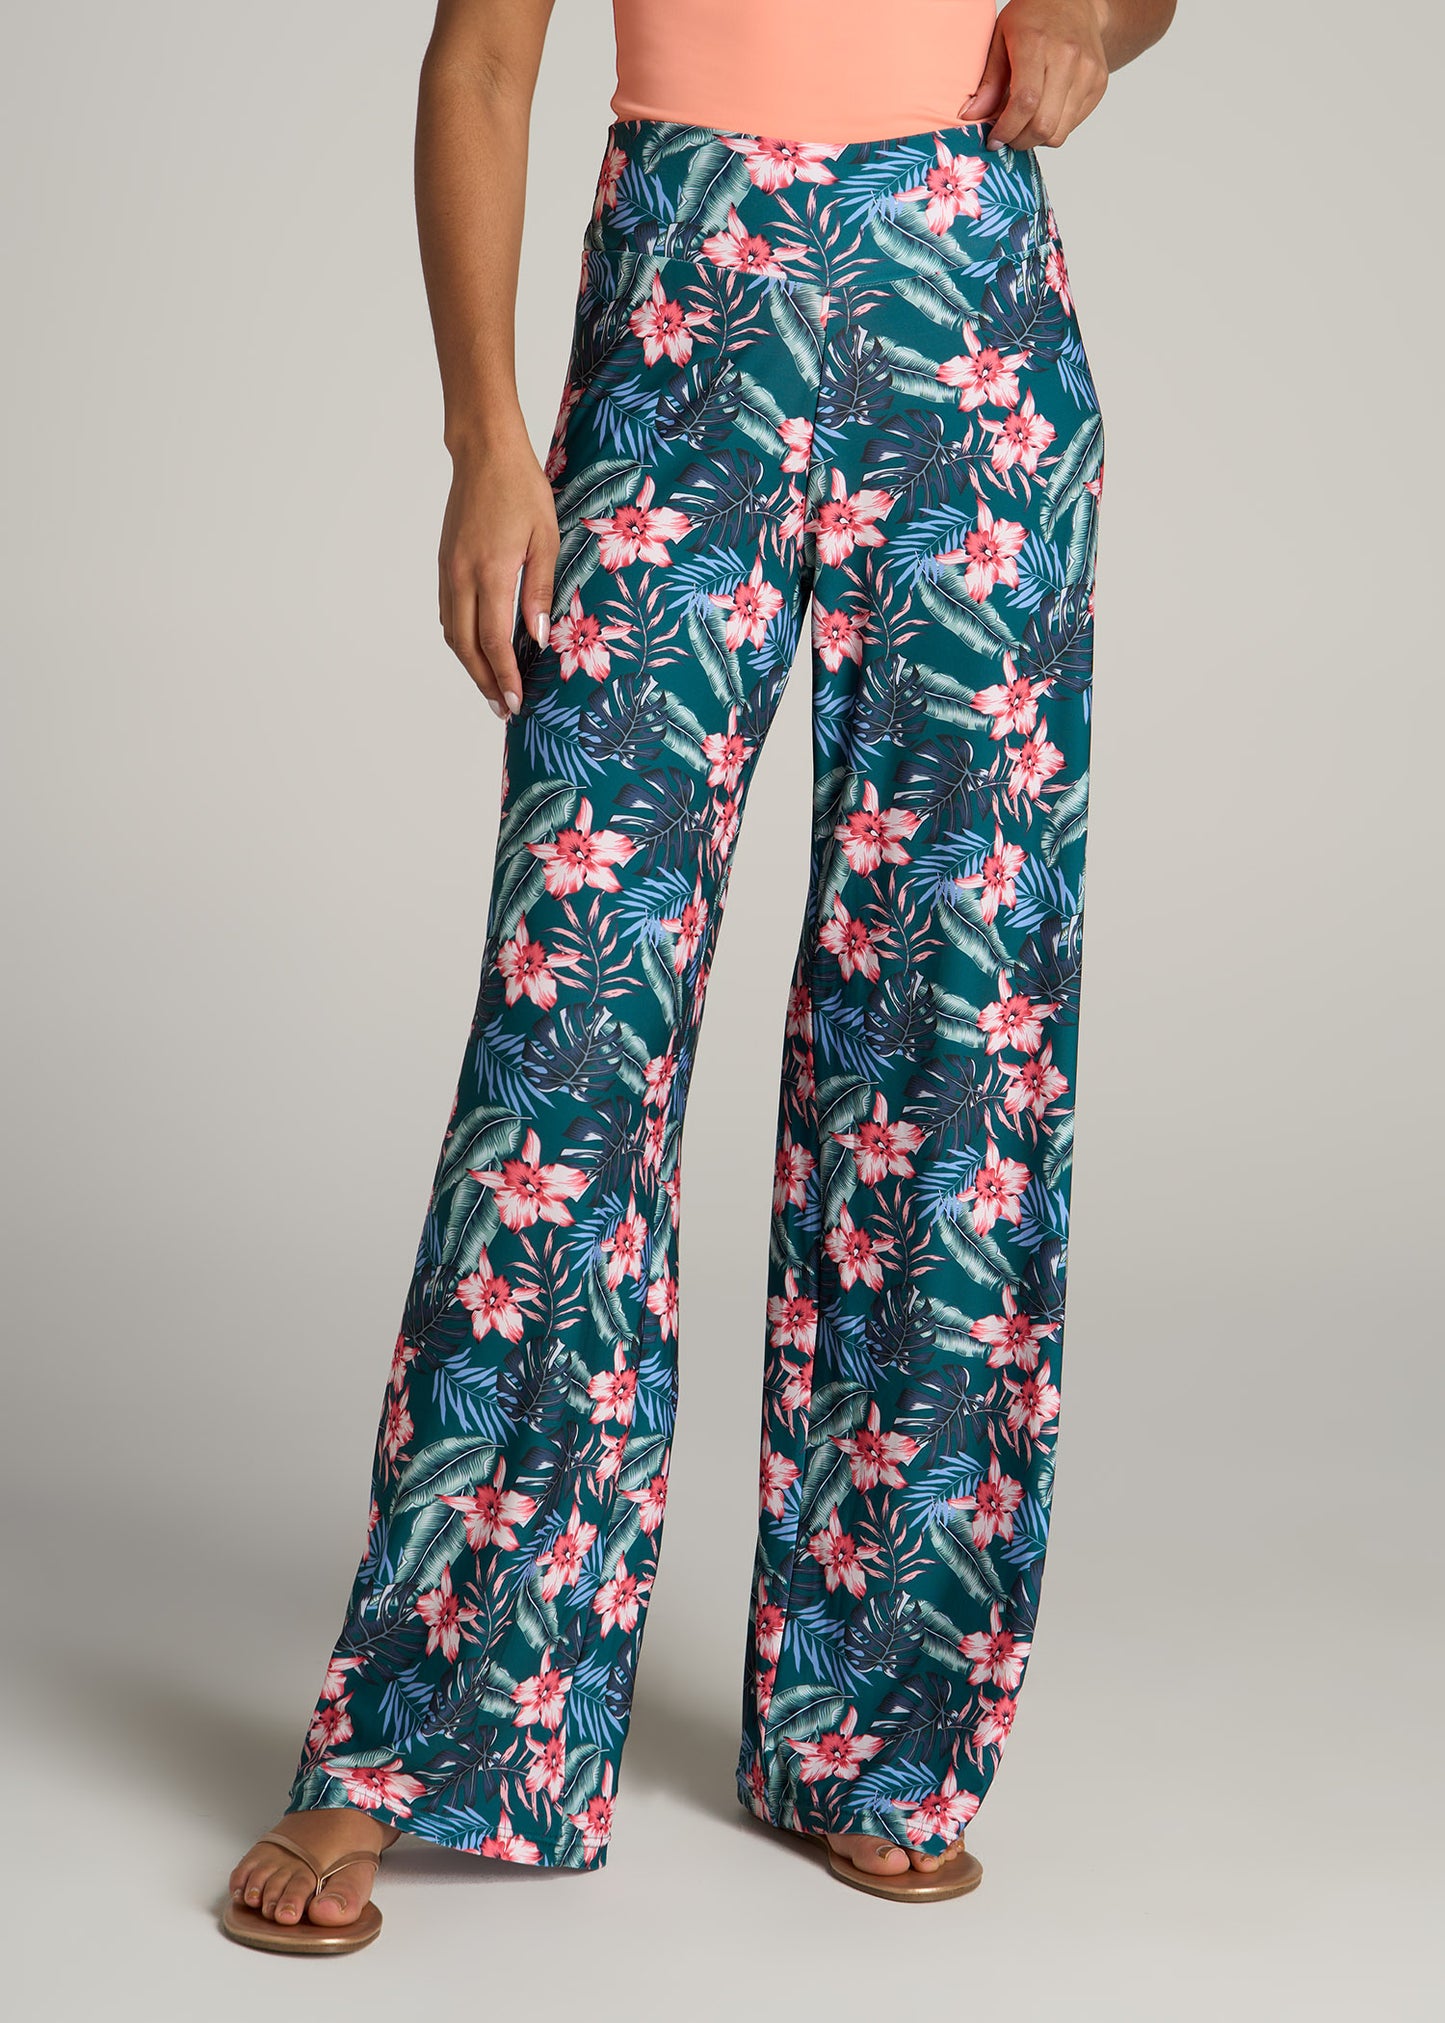 A tall woman wearing American Tall's Pull On Breezy Wide Leg Pants for Tall Women in Green Tropical Floral Print.